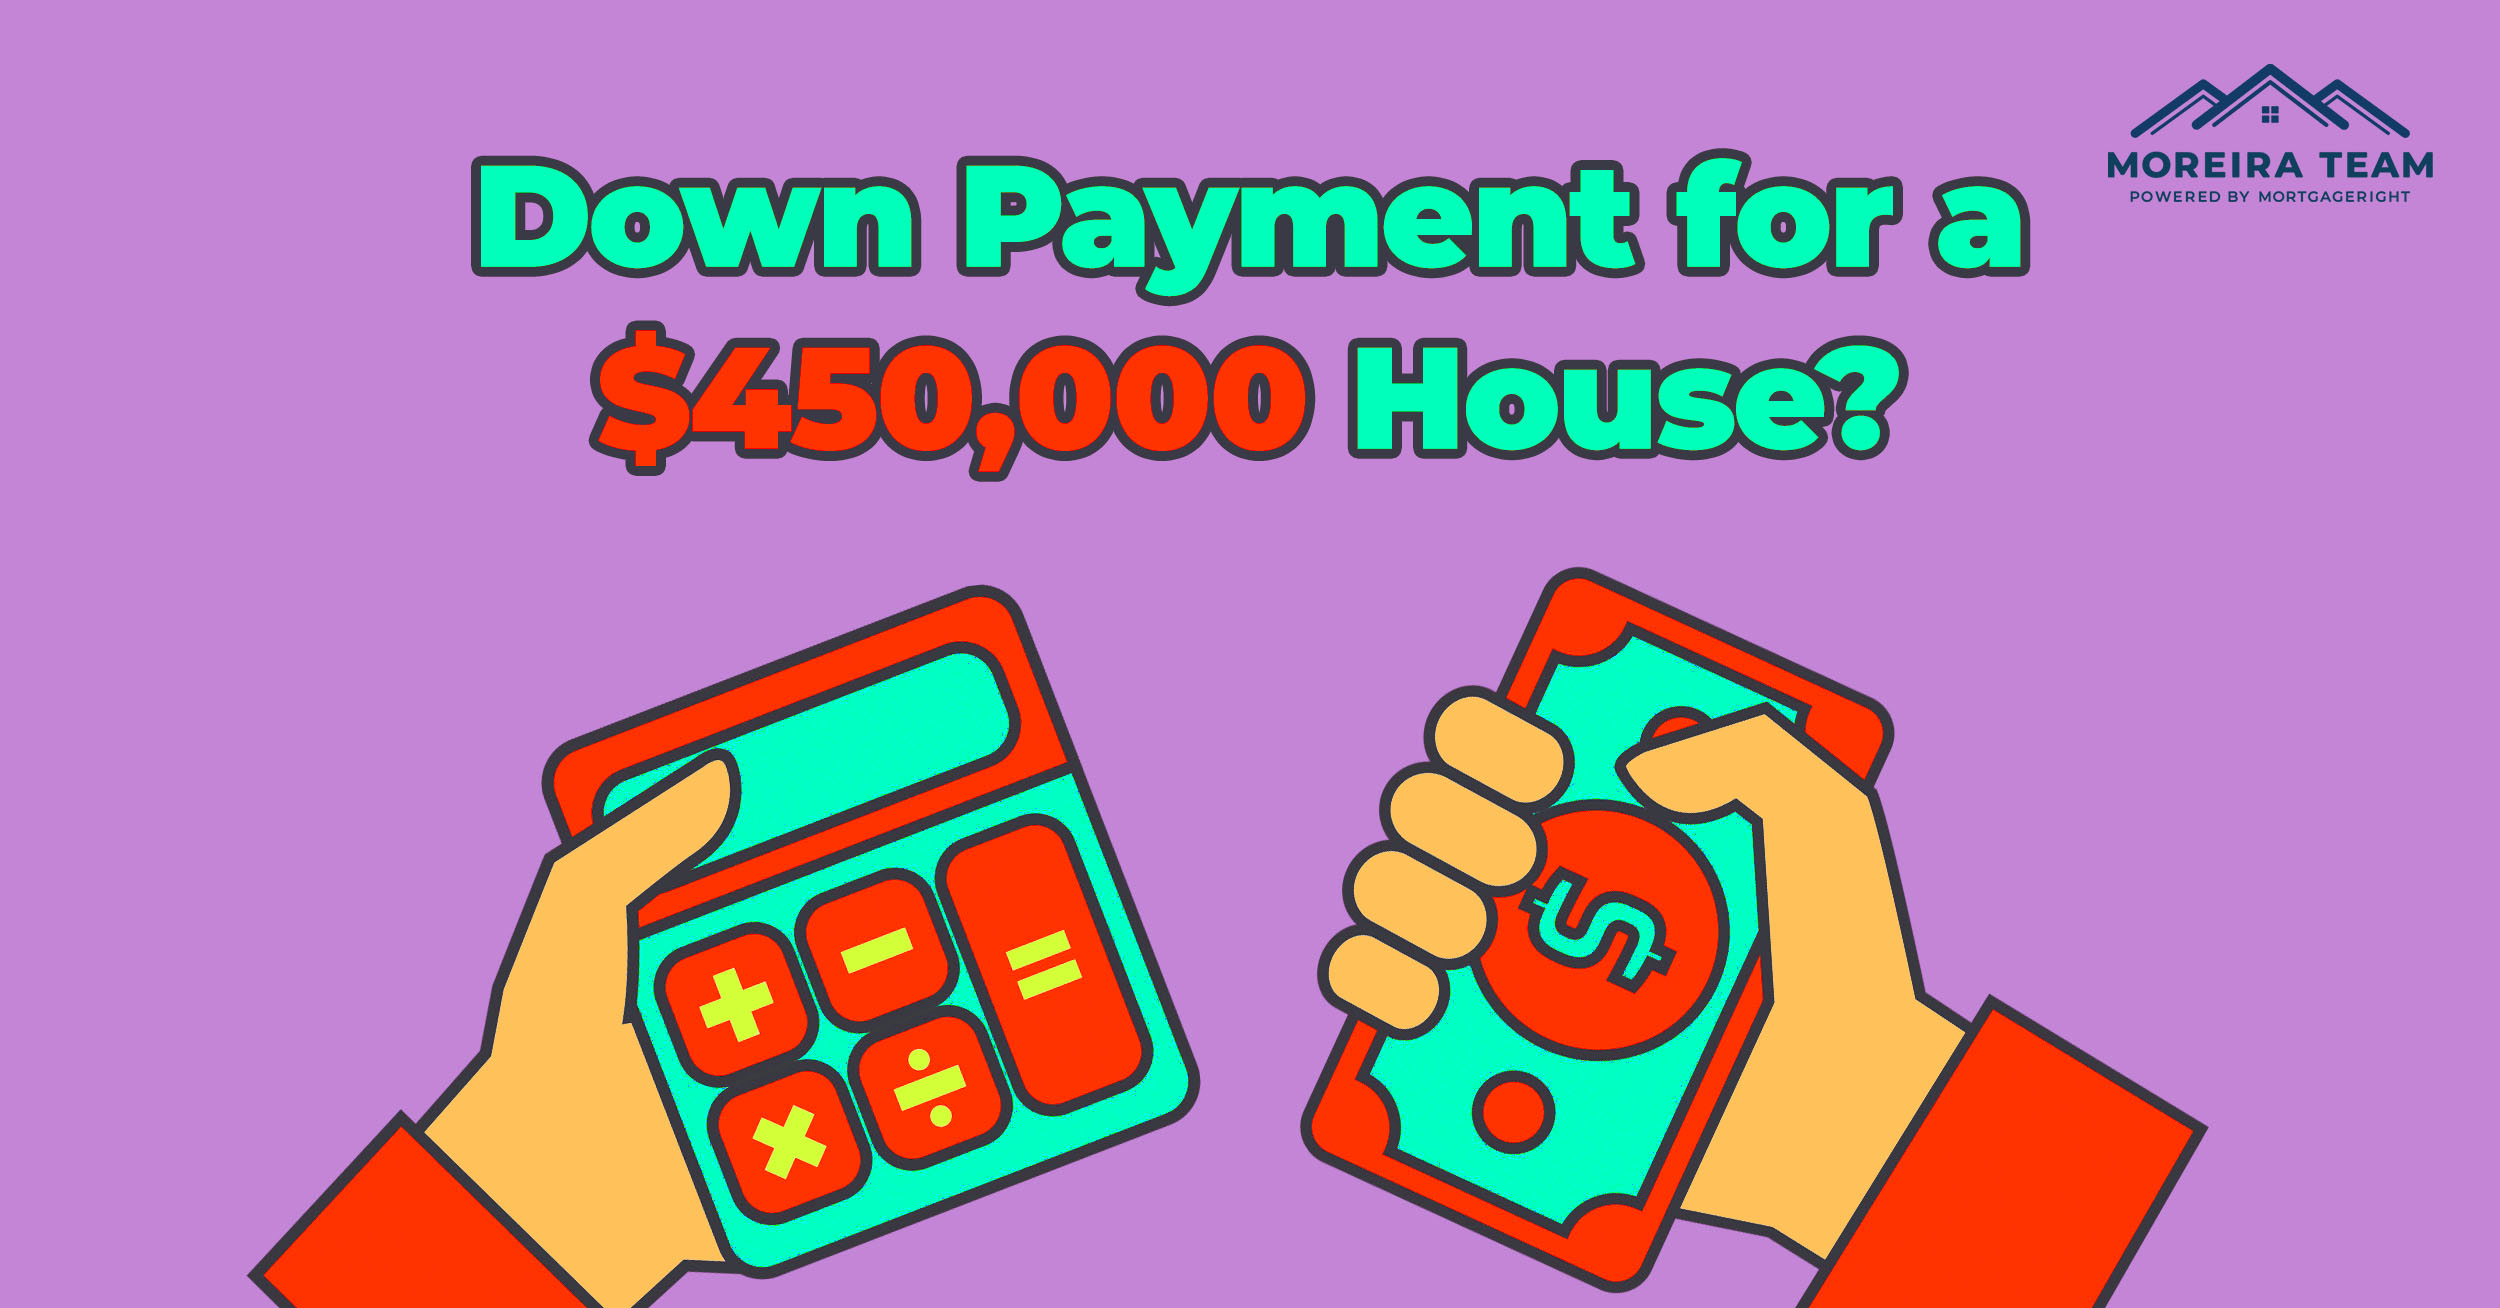 How Much is a Down Payment for a $450,000 Home?